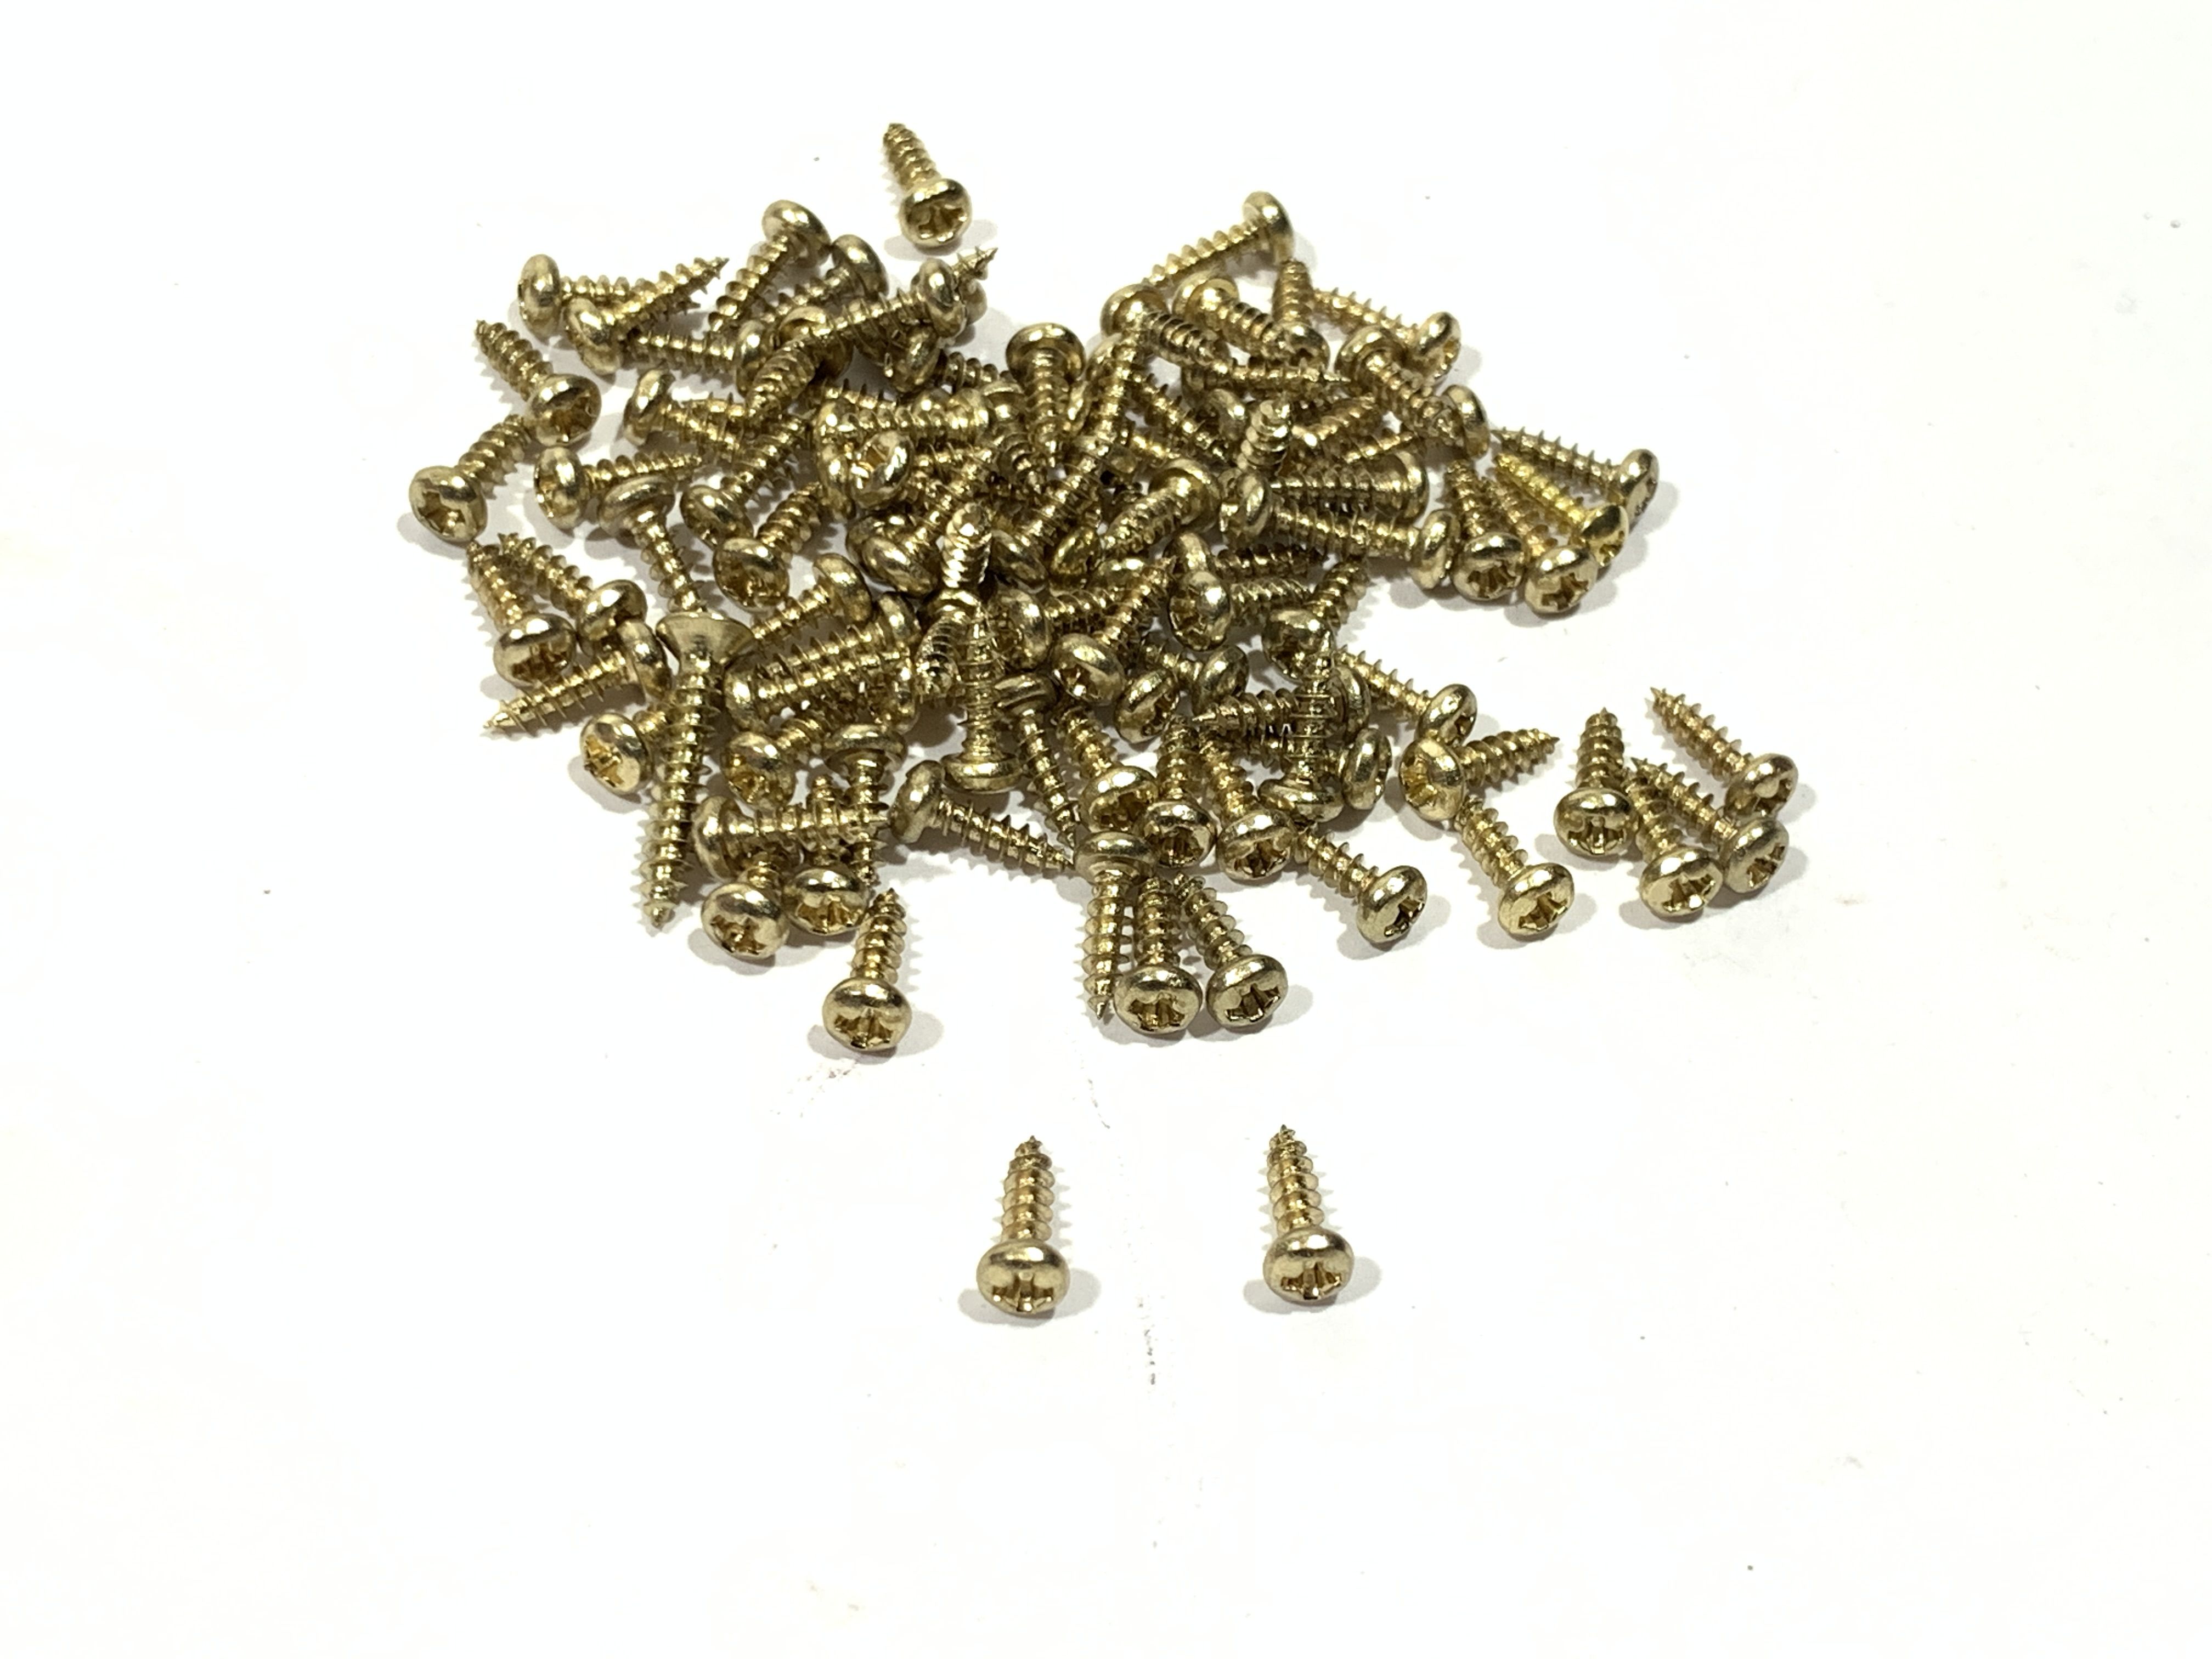 10 - Durable and Sturdy #14x4 Round Head Slotted Wood Screws Steel Zinc Plated Good Holding Power in Different Materials 